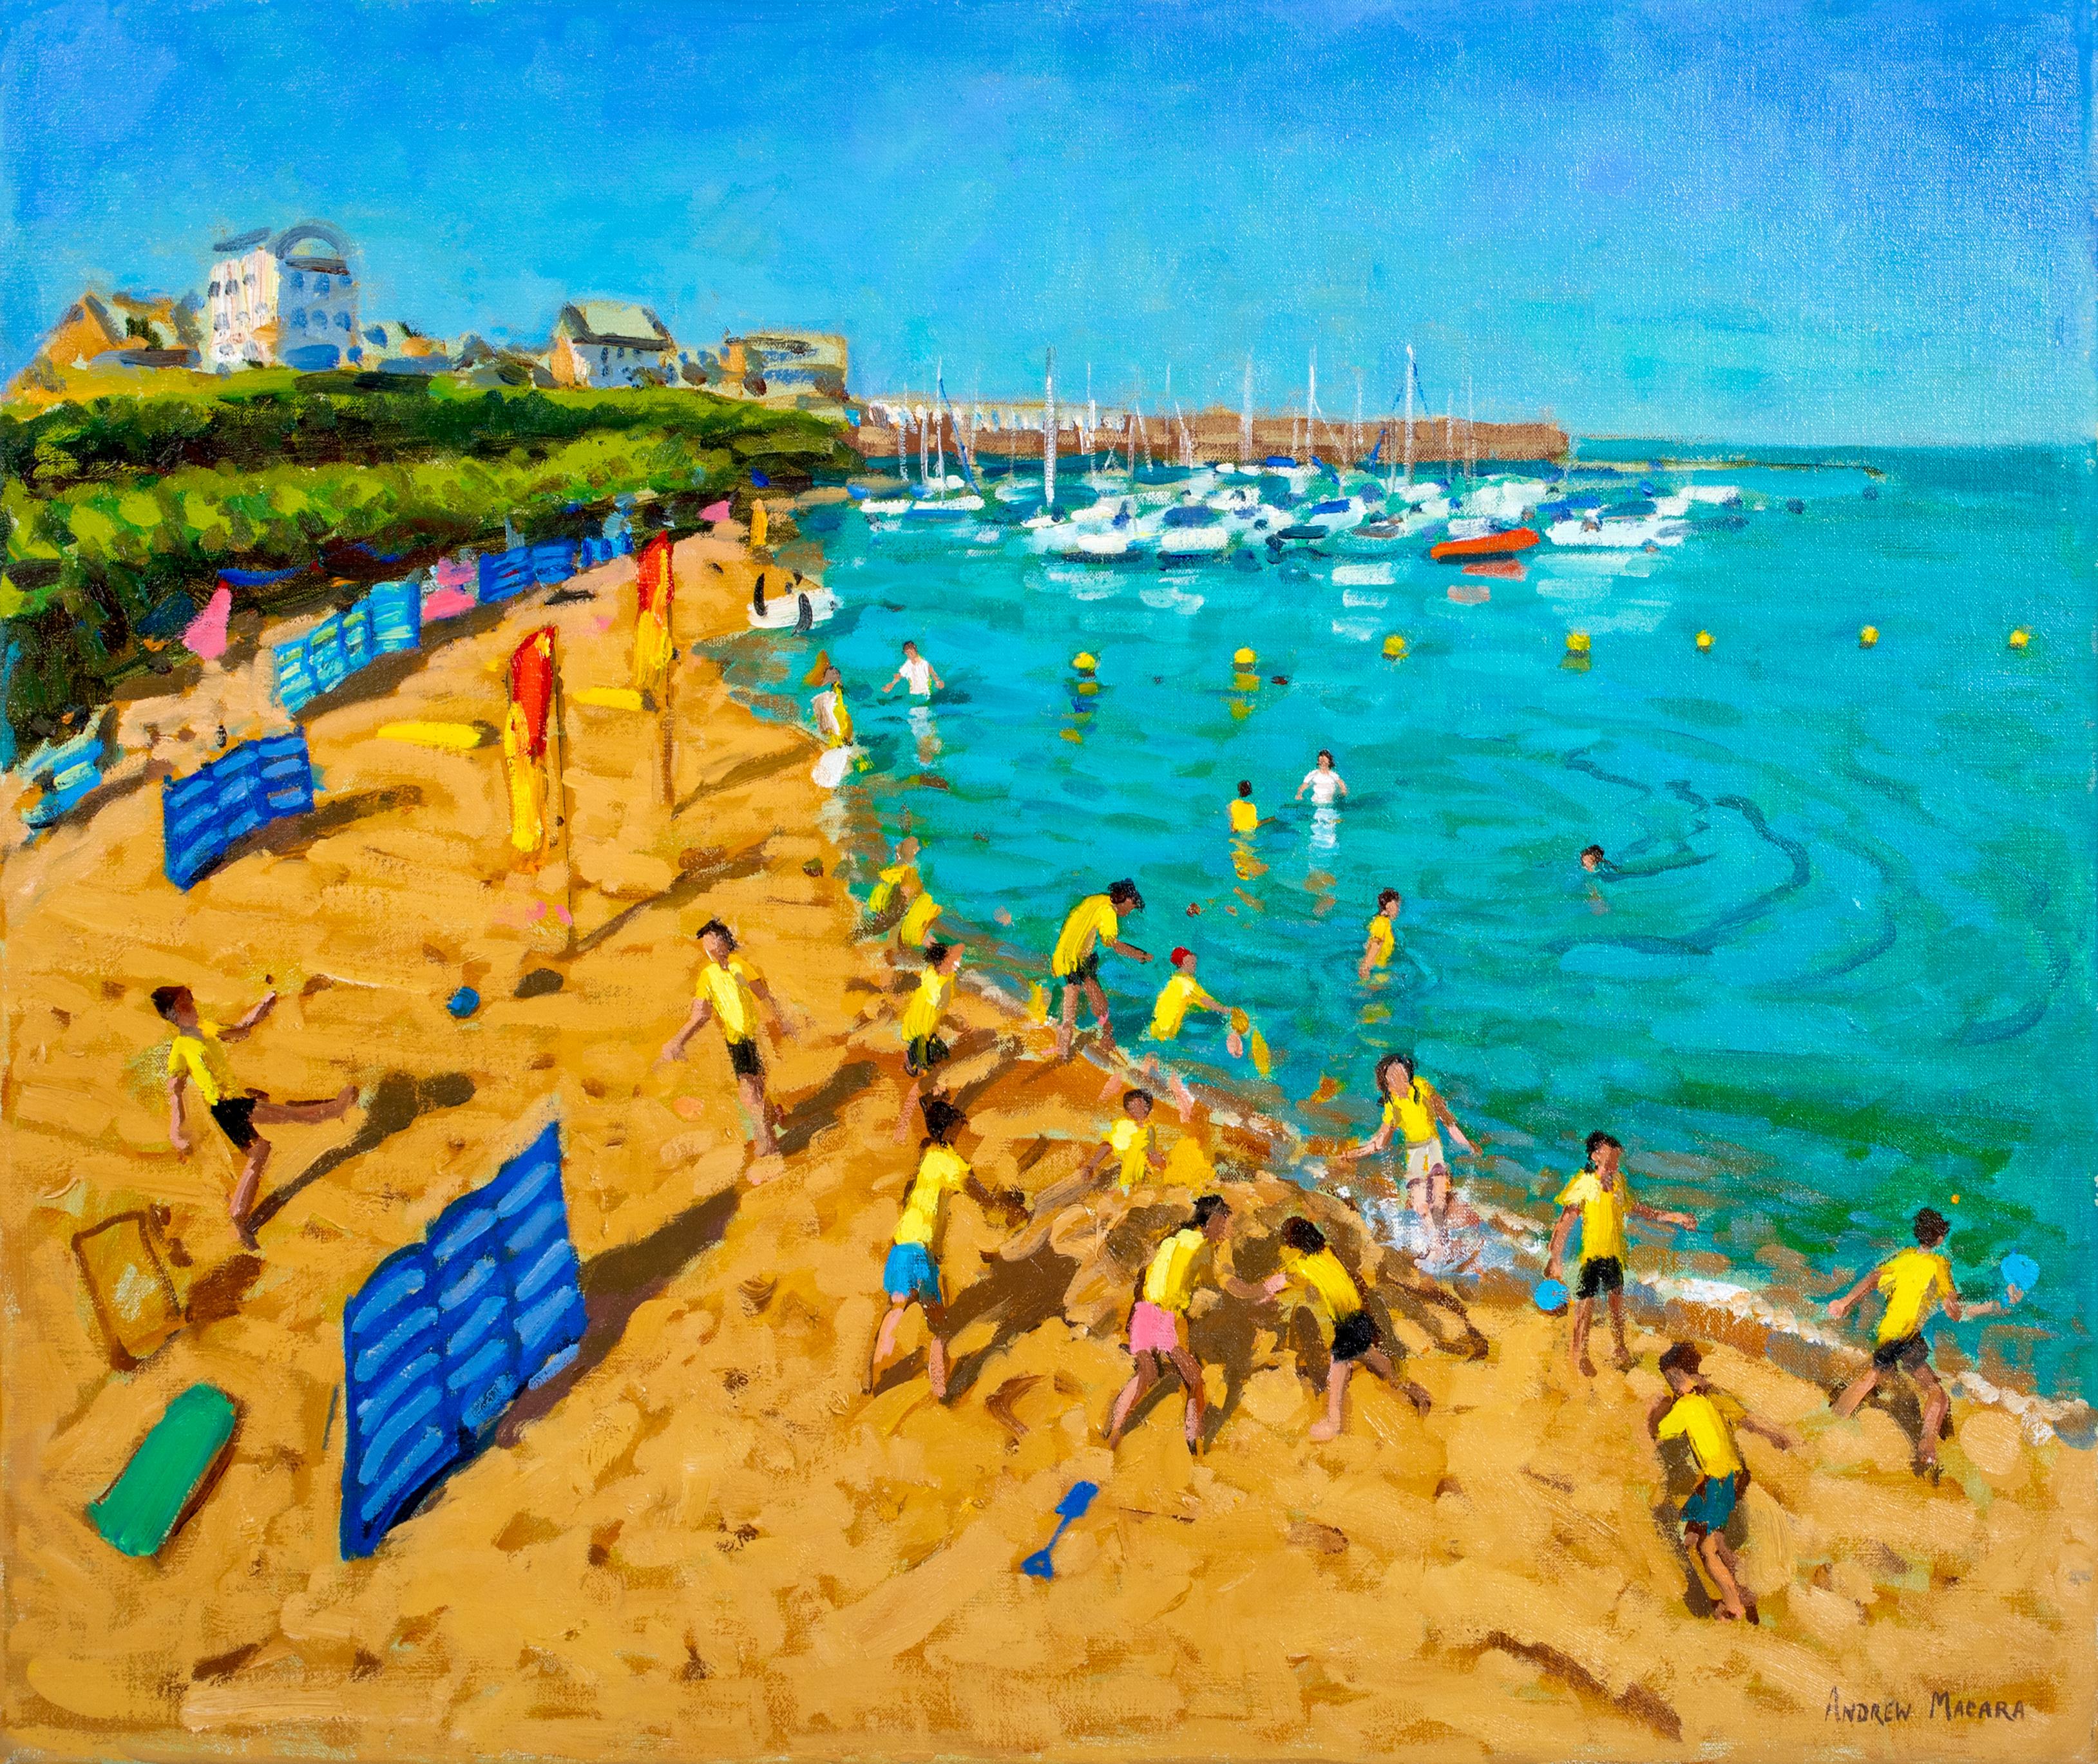 School Trip, New Quay, Wales, July, 2013

by ANDREW MACARA

Large 20th Century summer beach scene with school children at New quay, Wales, oil on canvas by Andrew Macara. Excellent quality and condition example of the artists work. Signed, titled